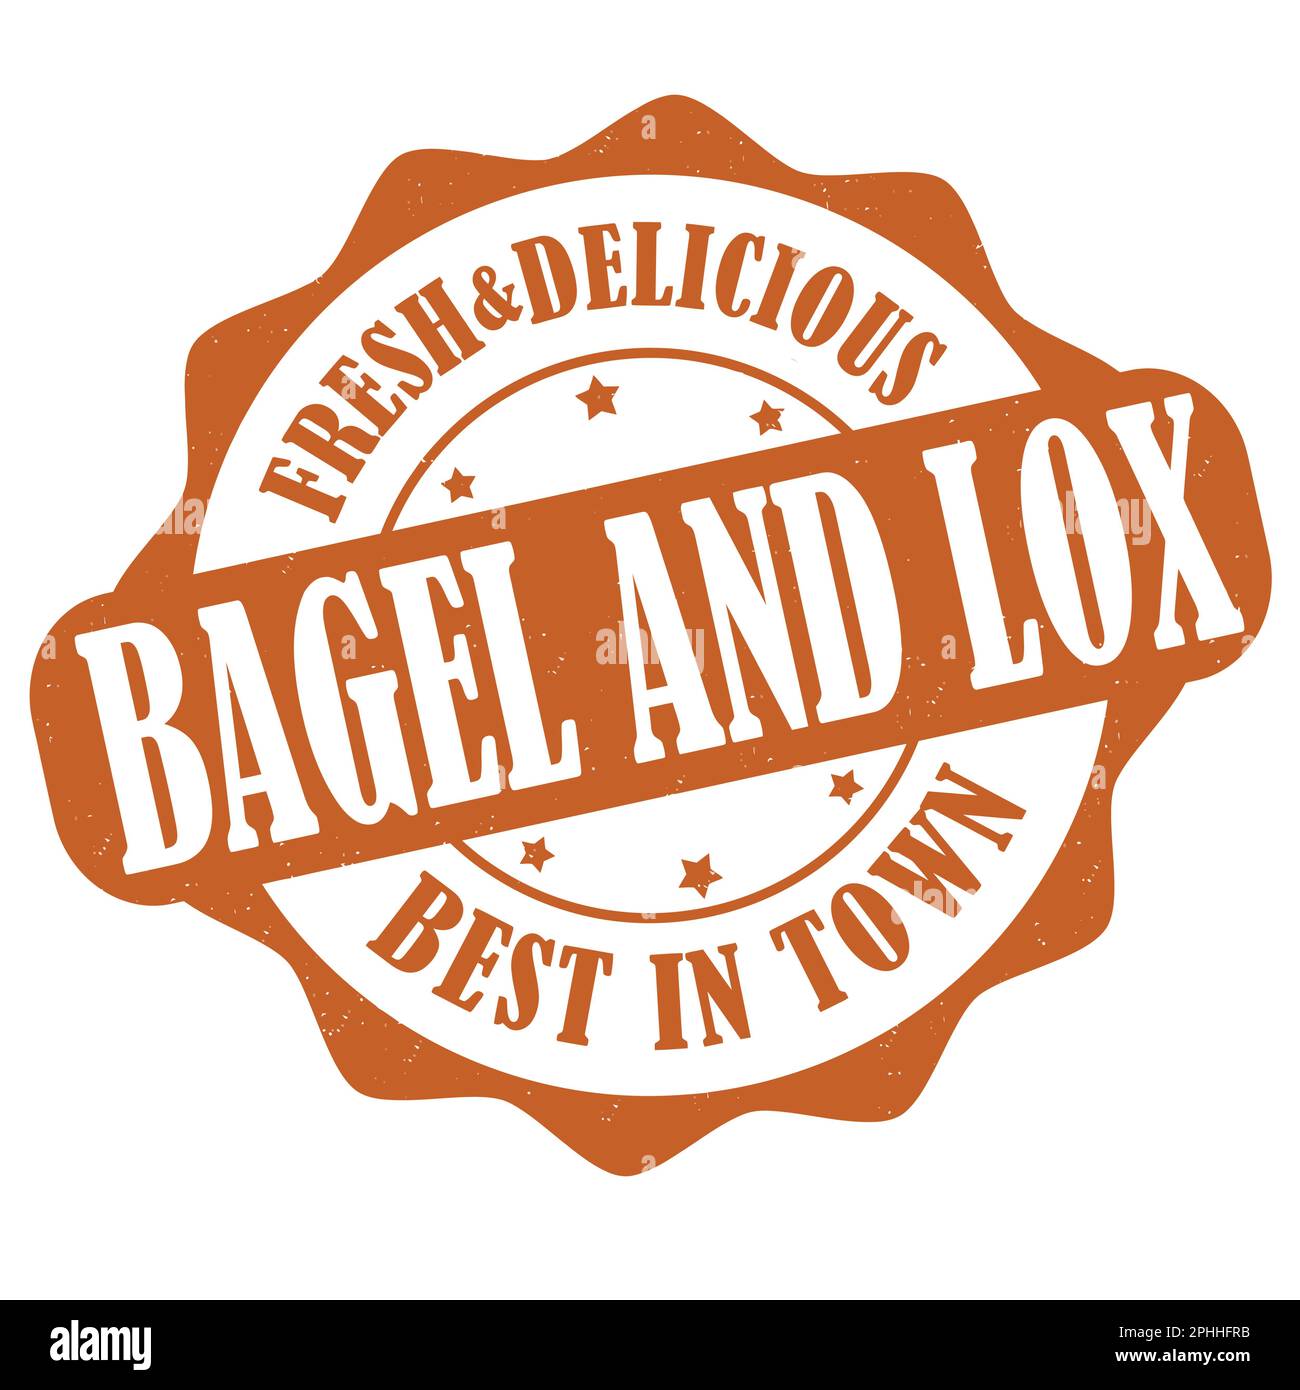 Bagel and lox label or stamp on white background, vector illustration Stock Vector